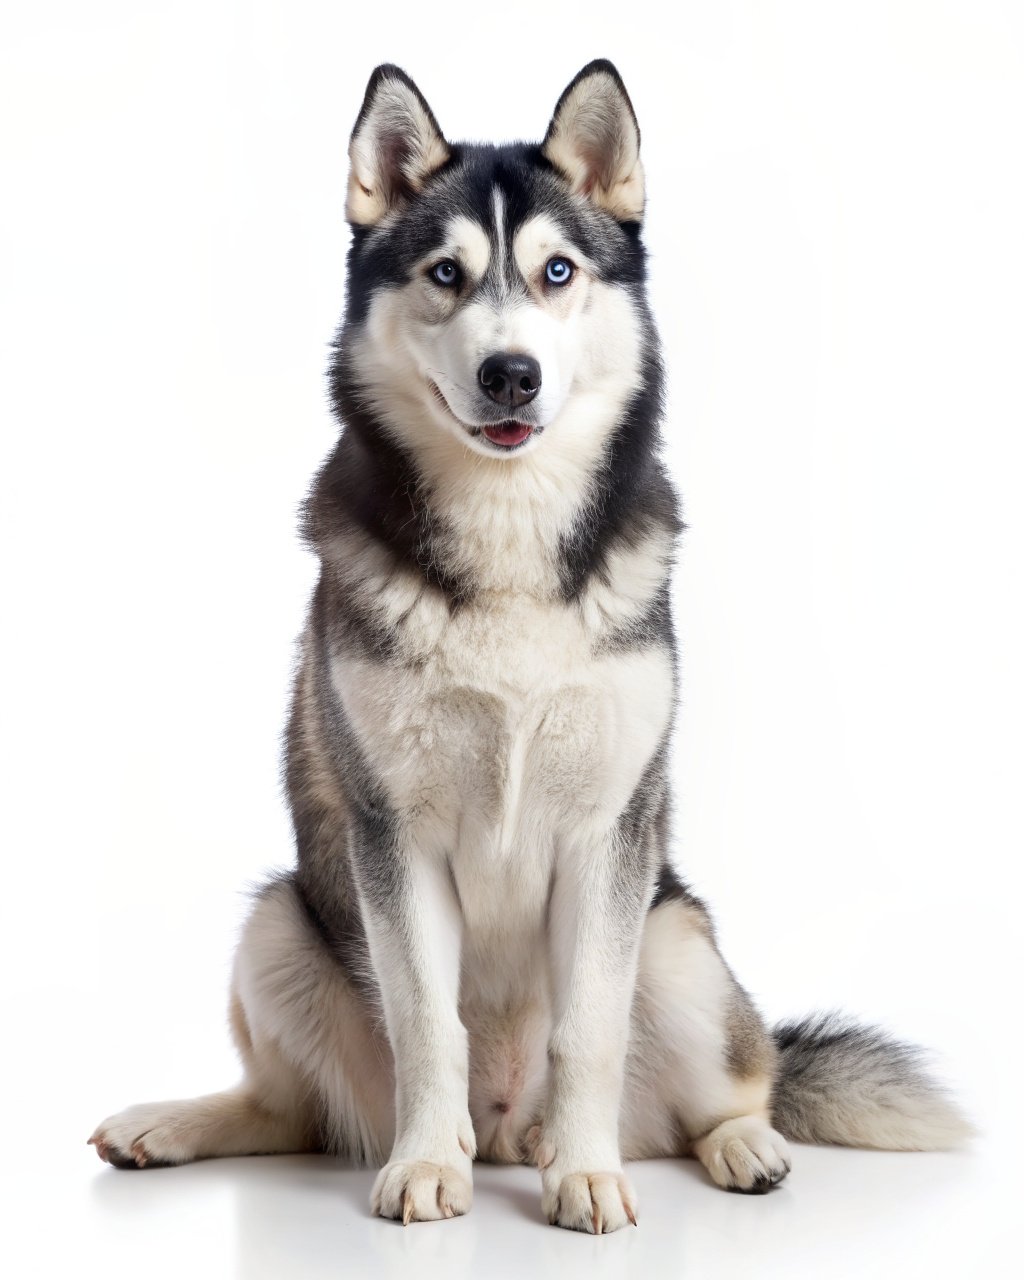 Husky is sitting on a white background